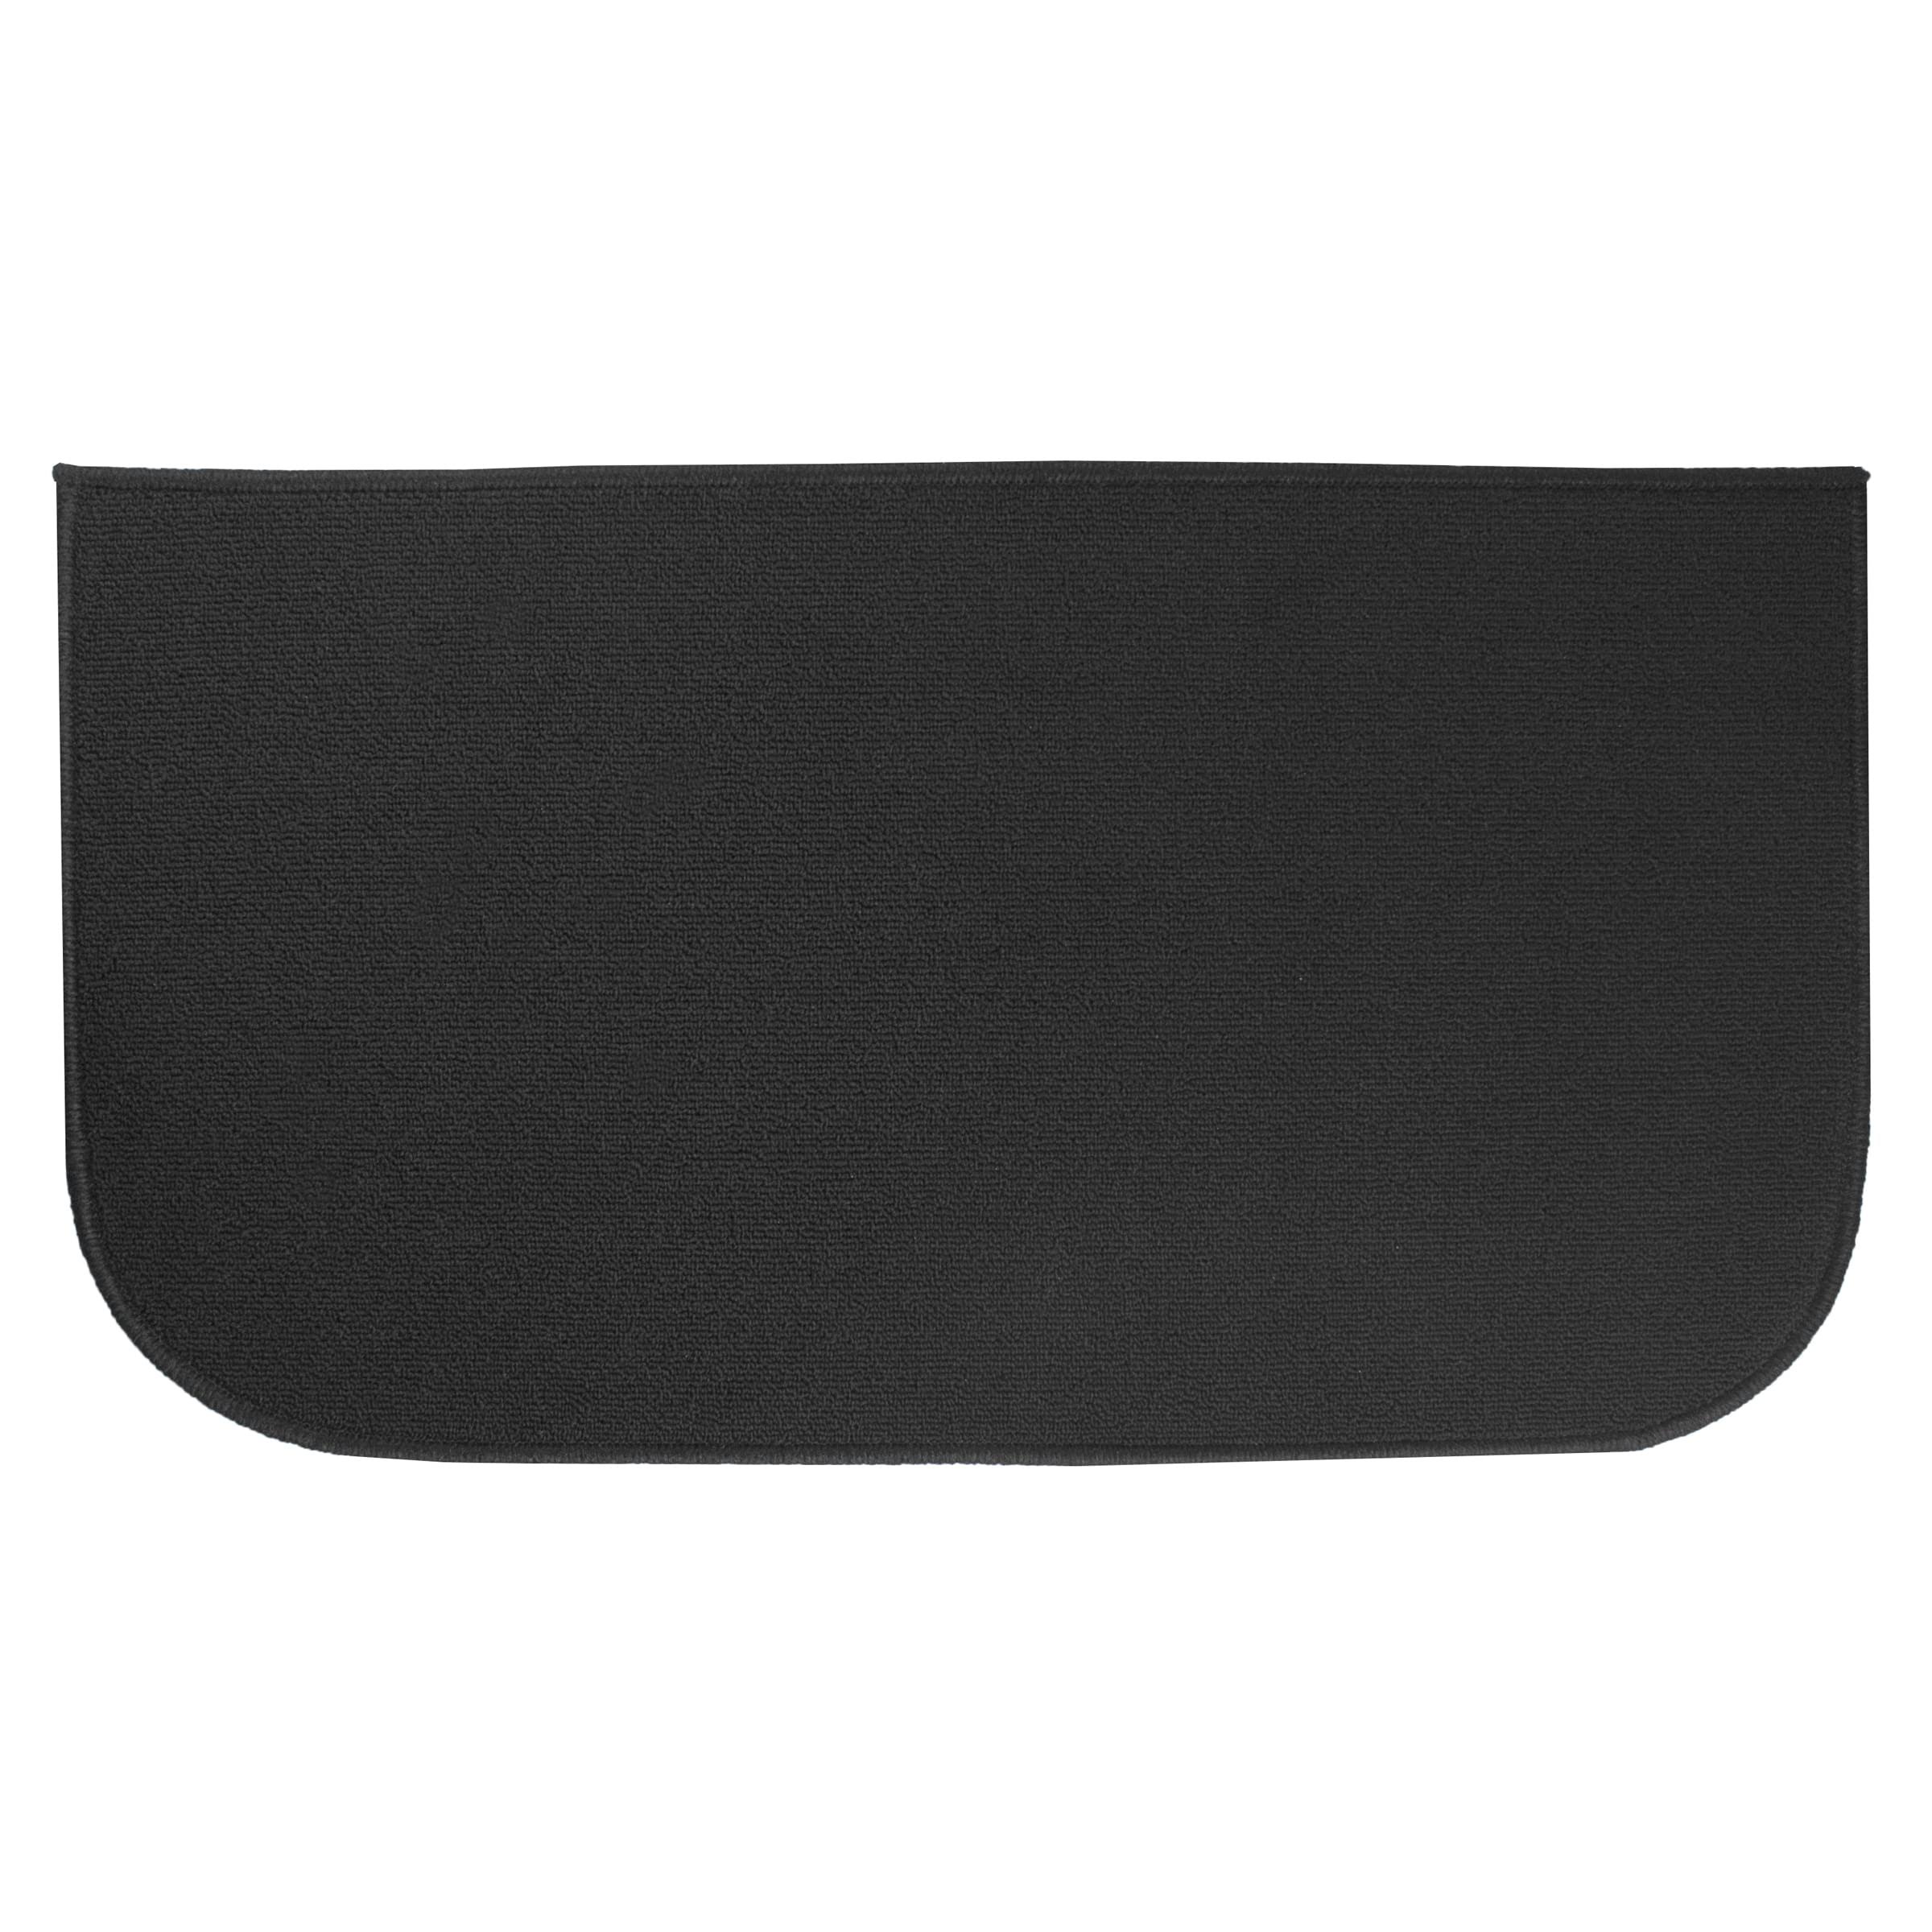 Ritz Accent Kitchen Rug with Latex Backing - Black, 20" x 36"